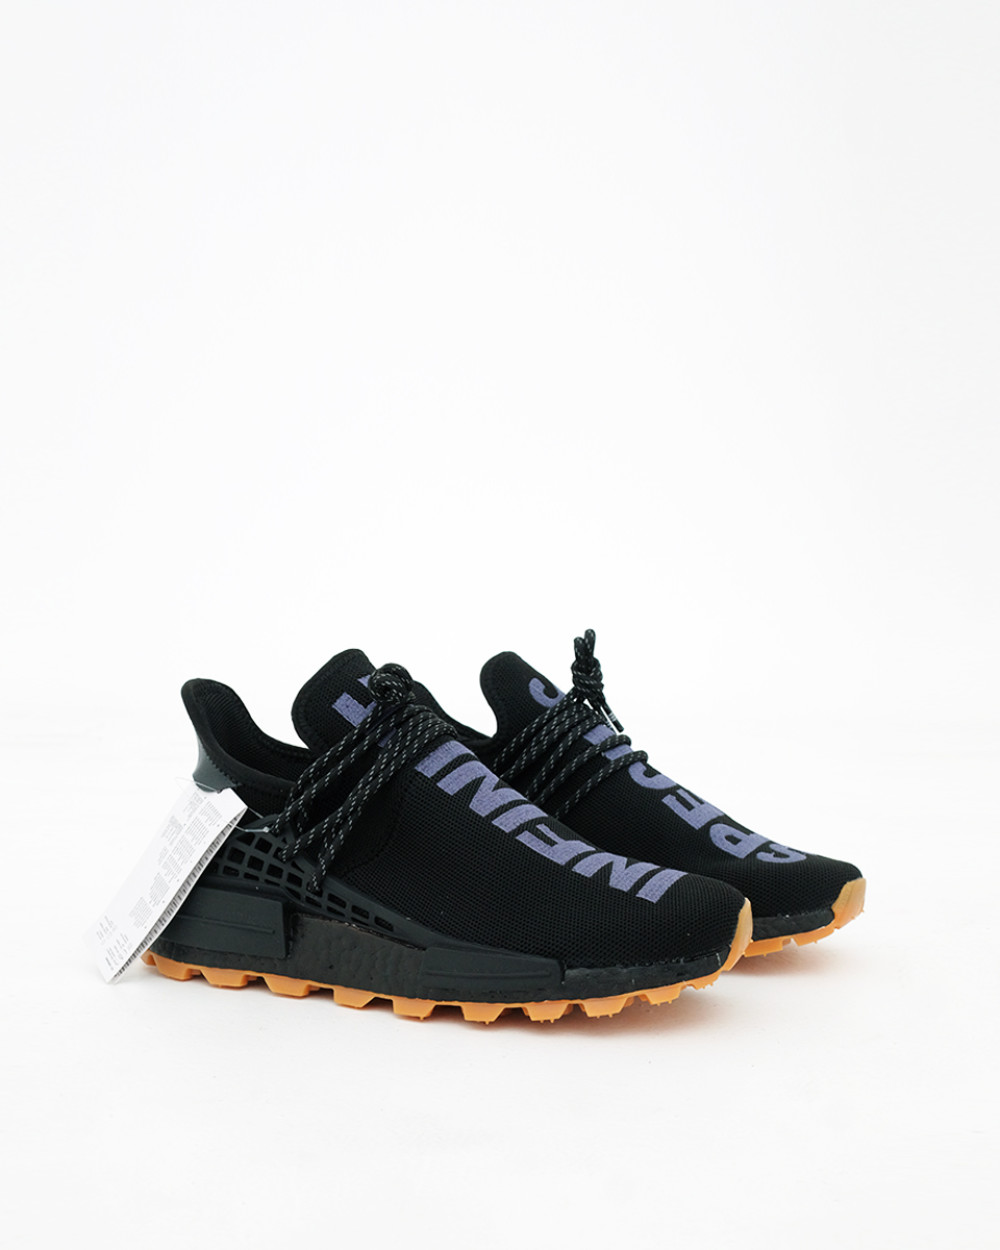 adidas nmd hu trail pharrell now is her time black